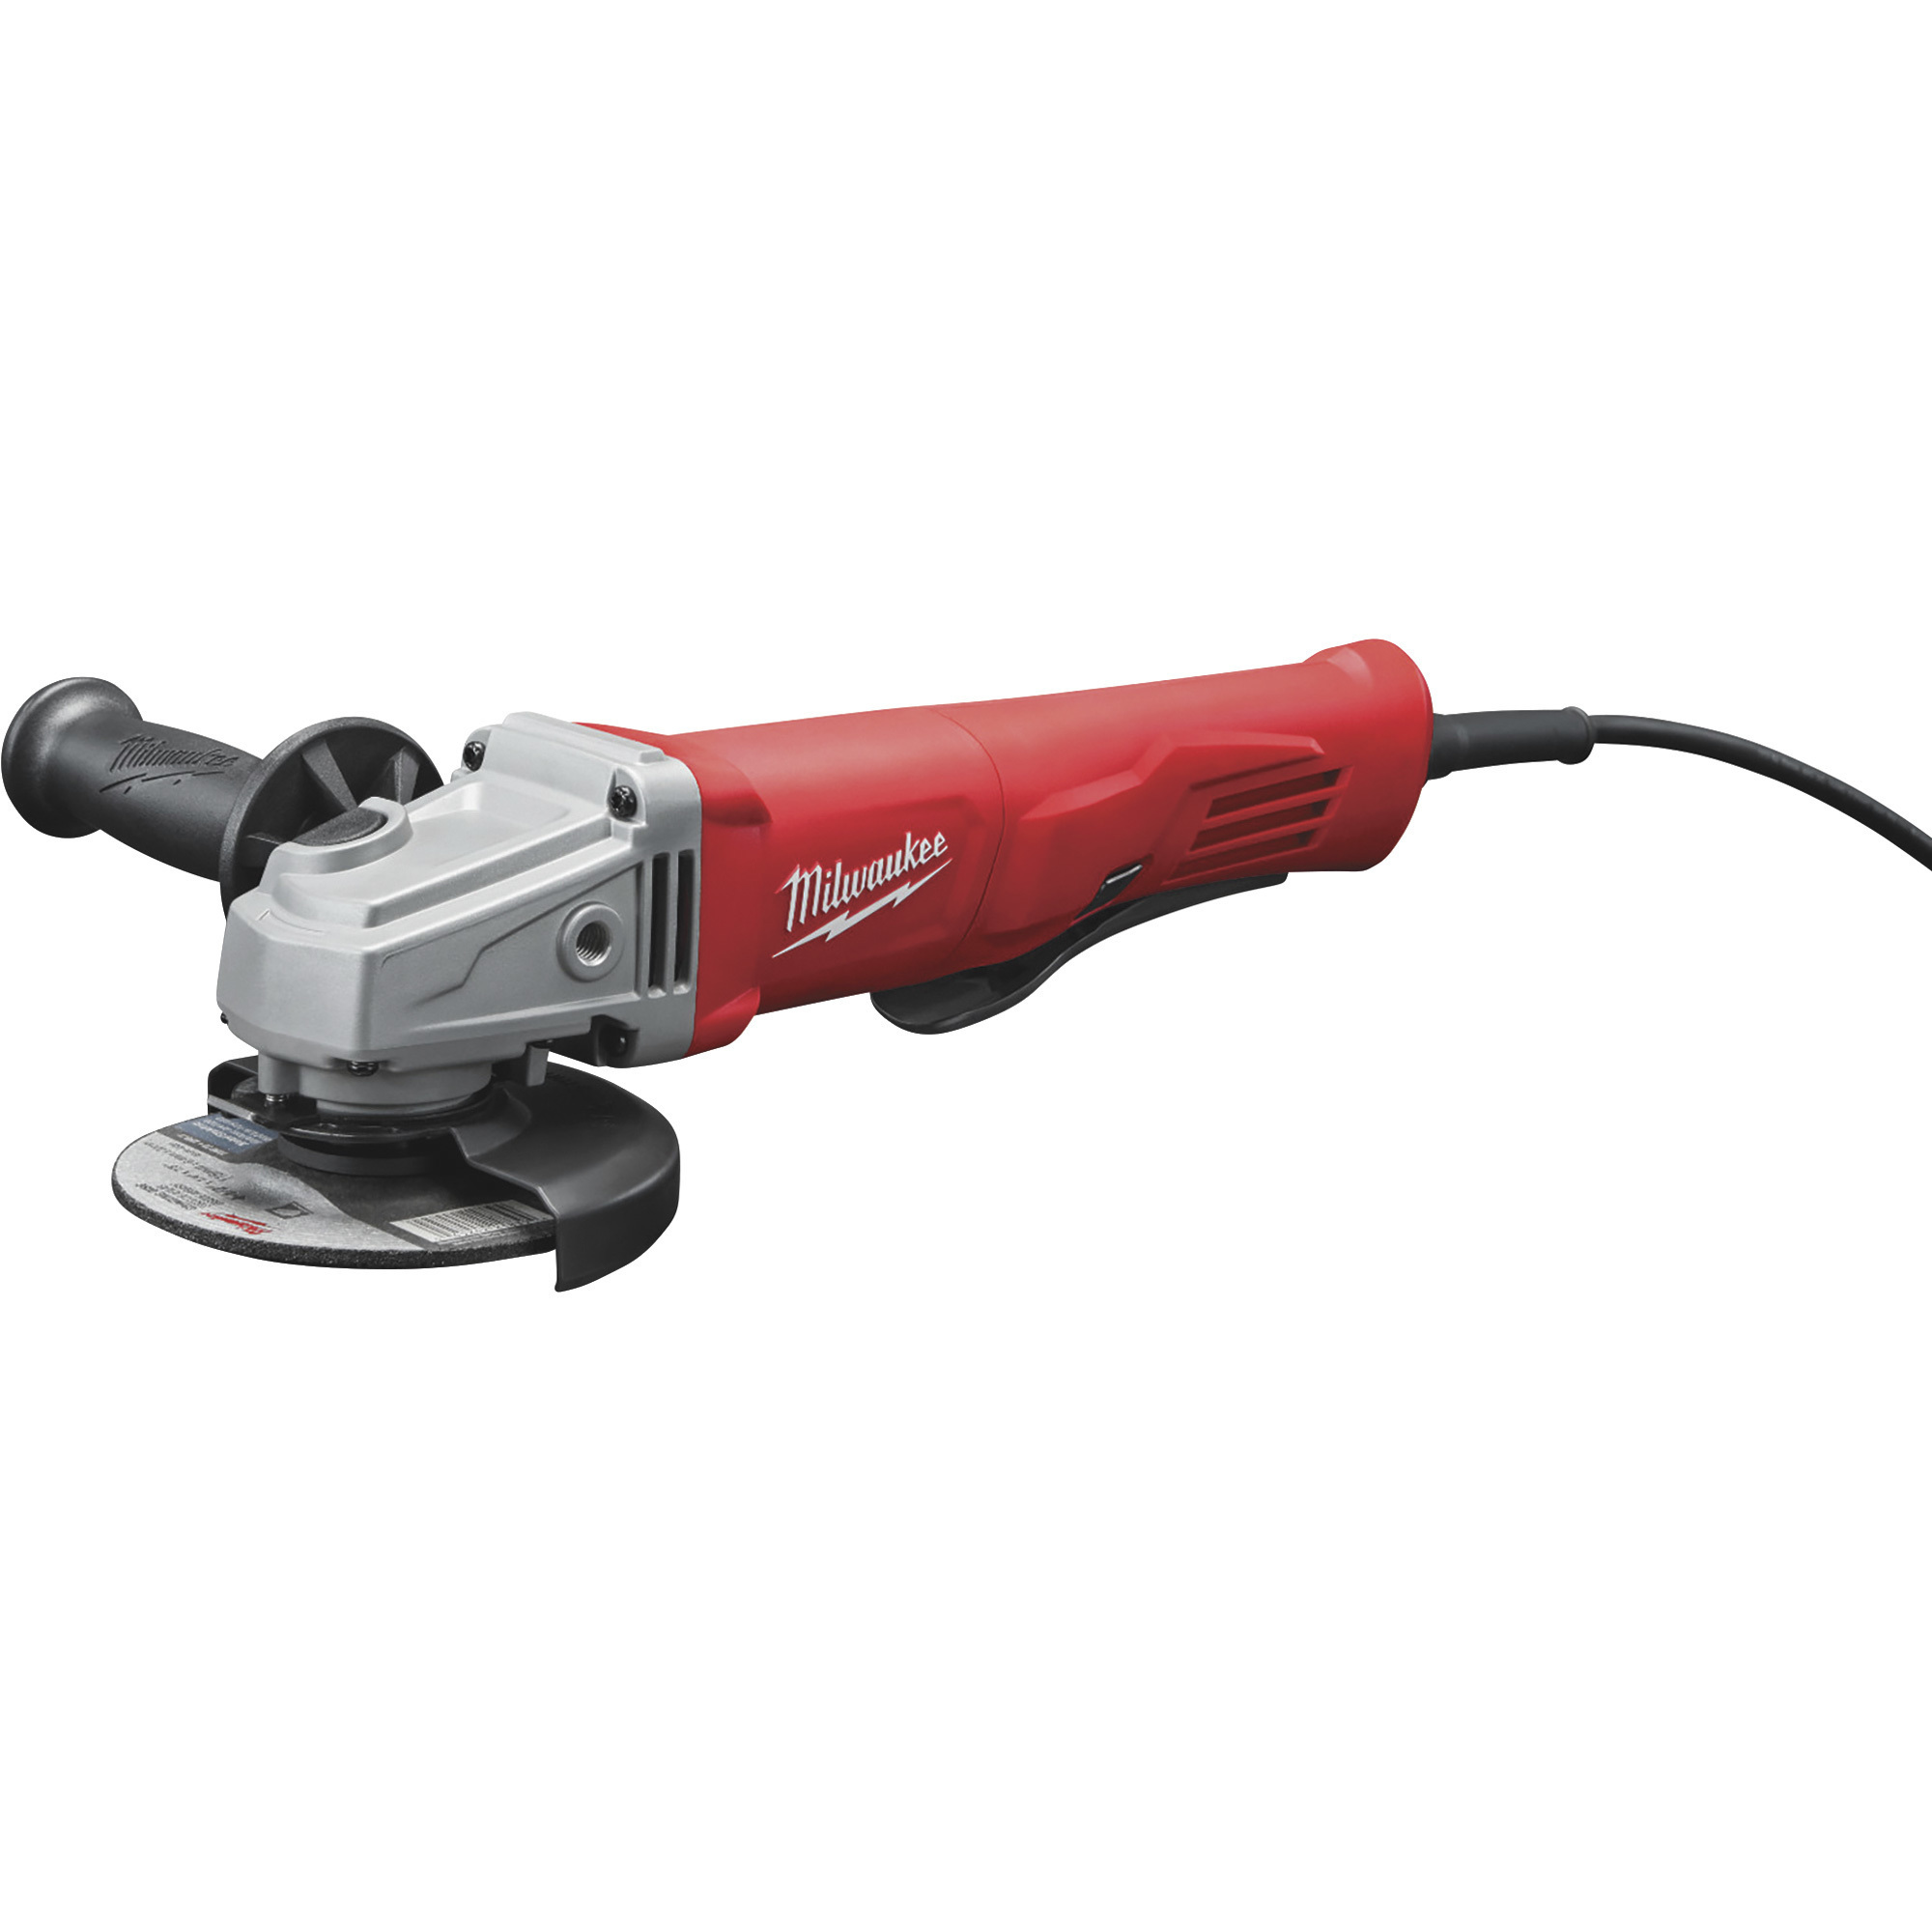 Milwaukee 4 1/2Inch Small Angle Grinder, 11 Amp, 11,000 RPM, Paddle, No-Lock, Model 6141-31